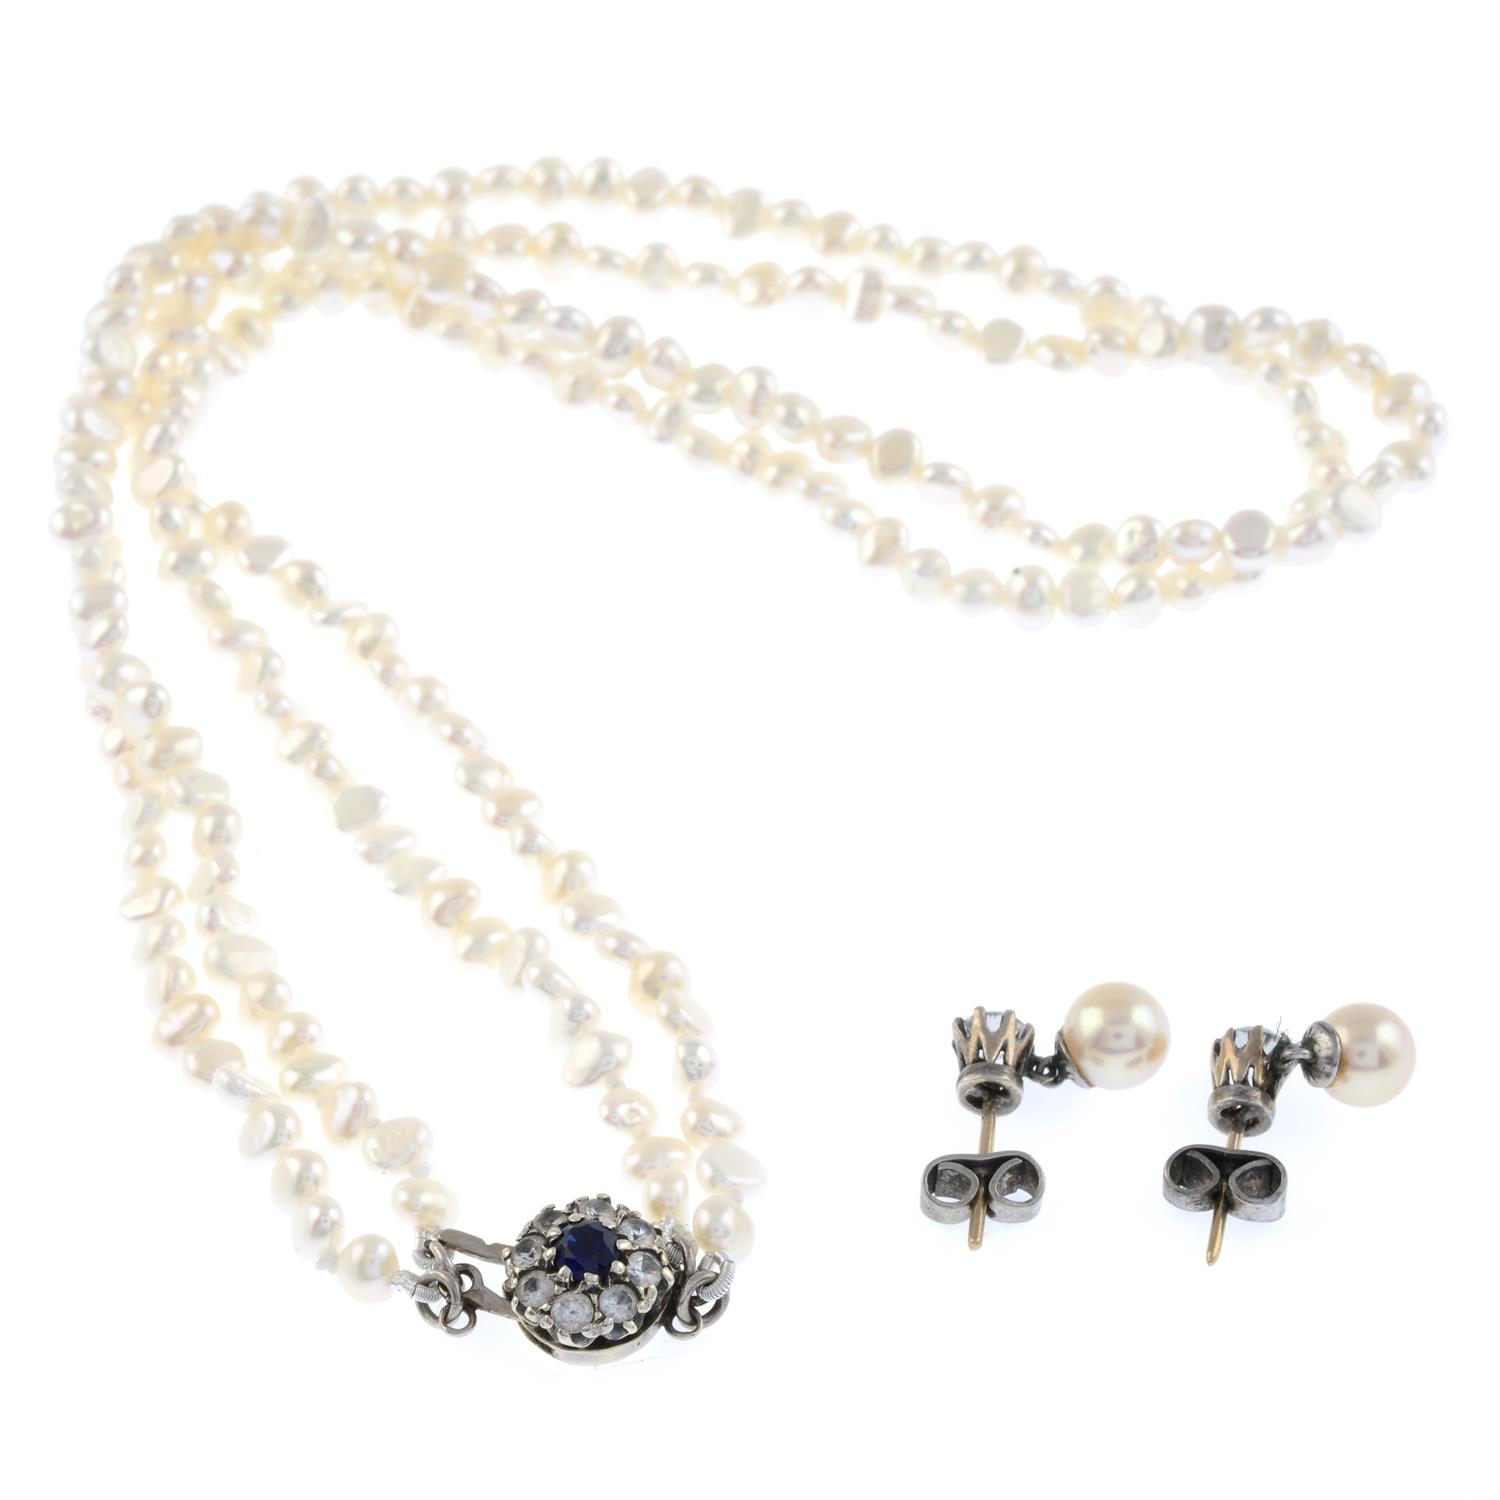 Cultured pearl & gem necklace & earrings - Image 3 of 3